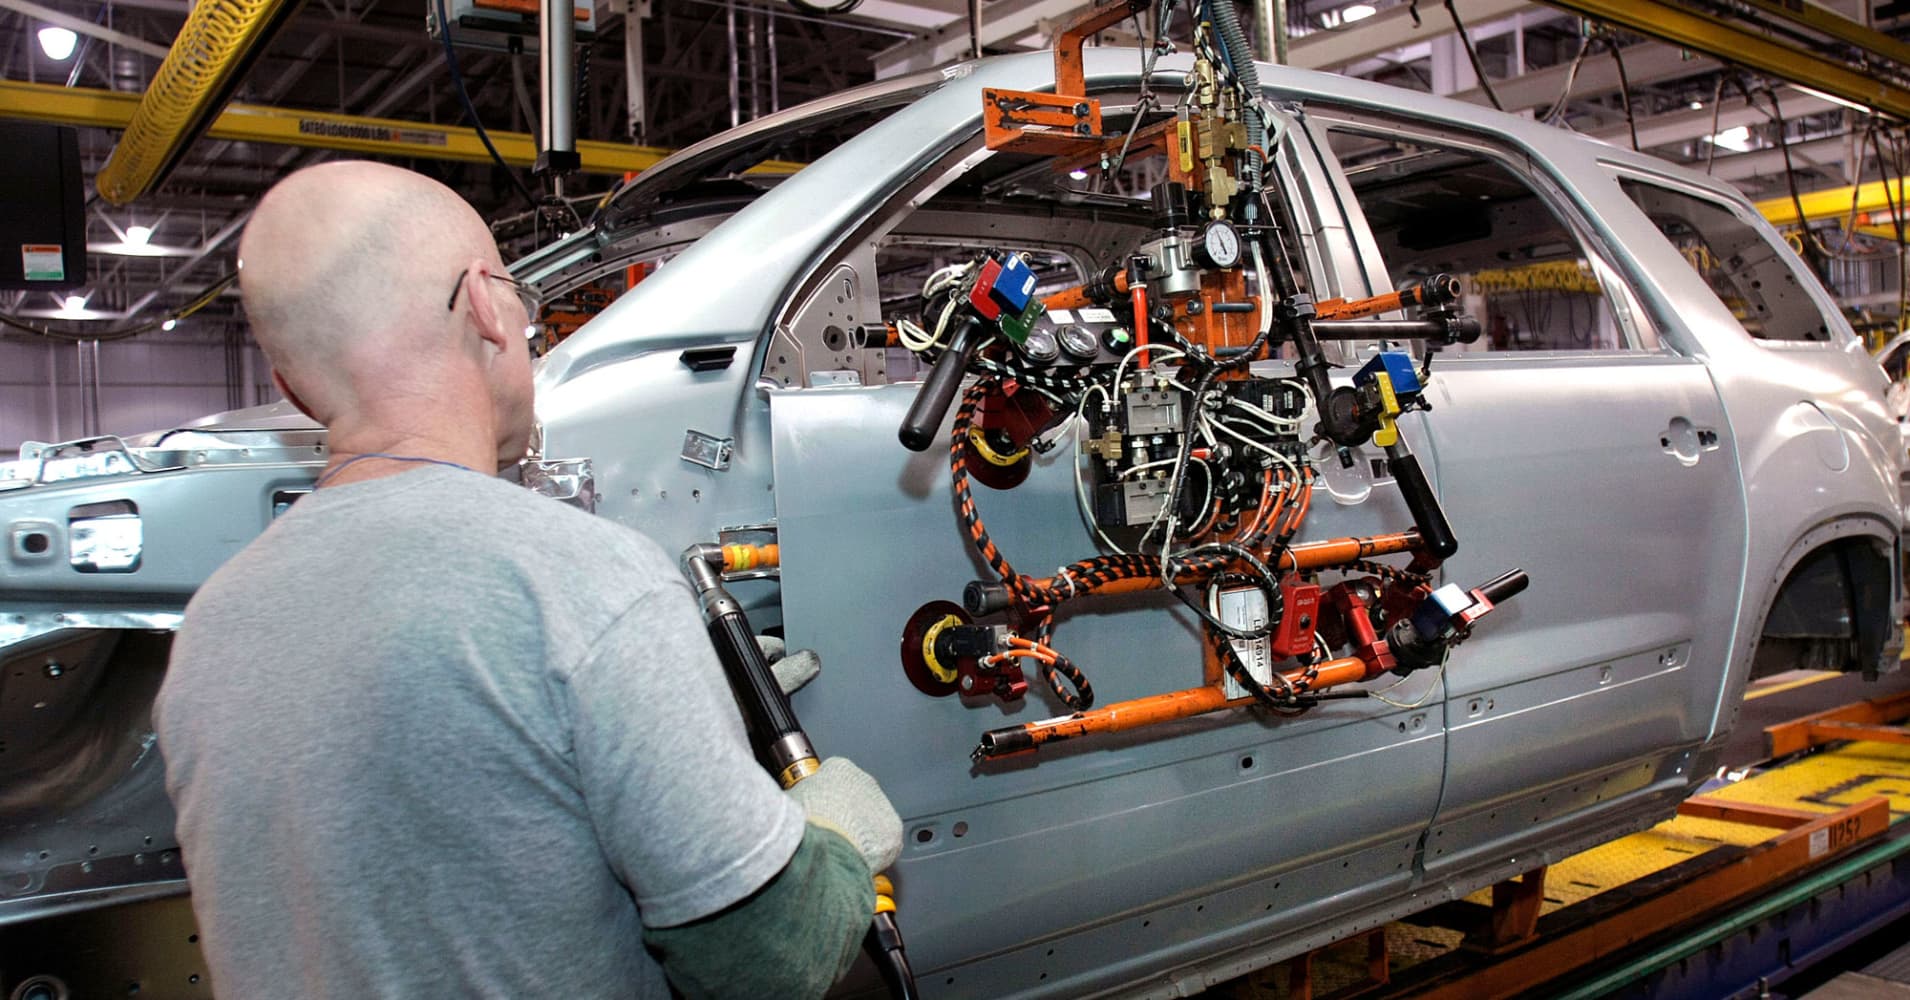 If the US wants high-end manufacturing jobs, the US needs imports